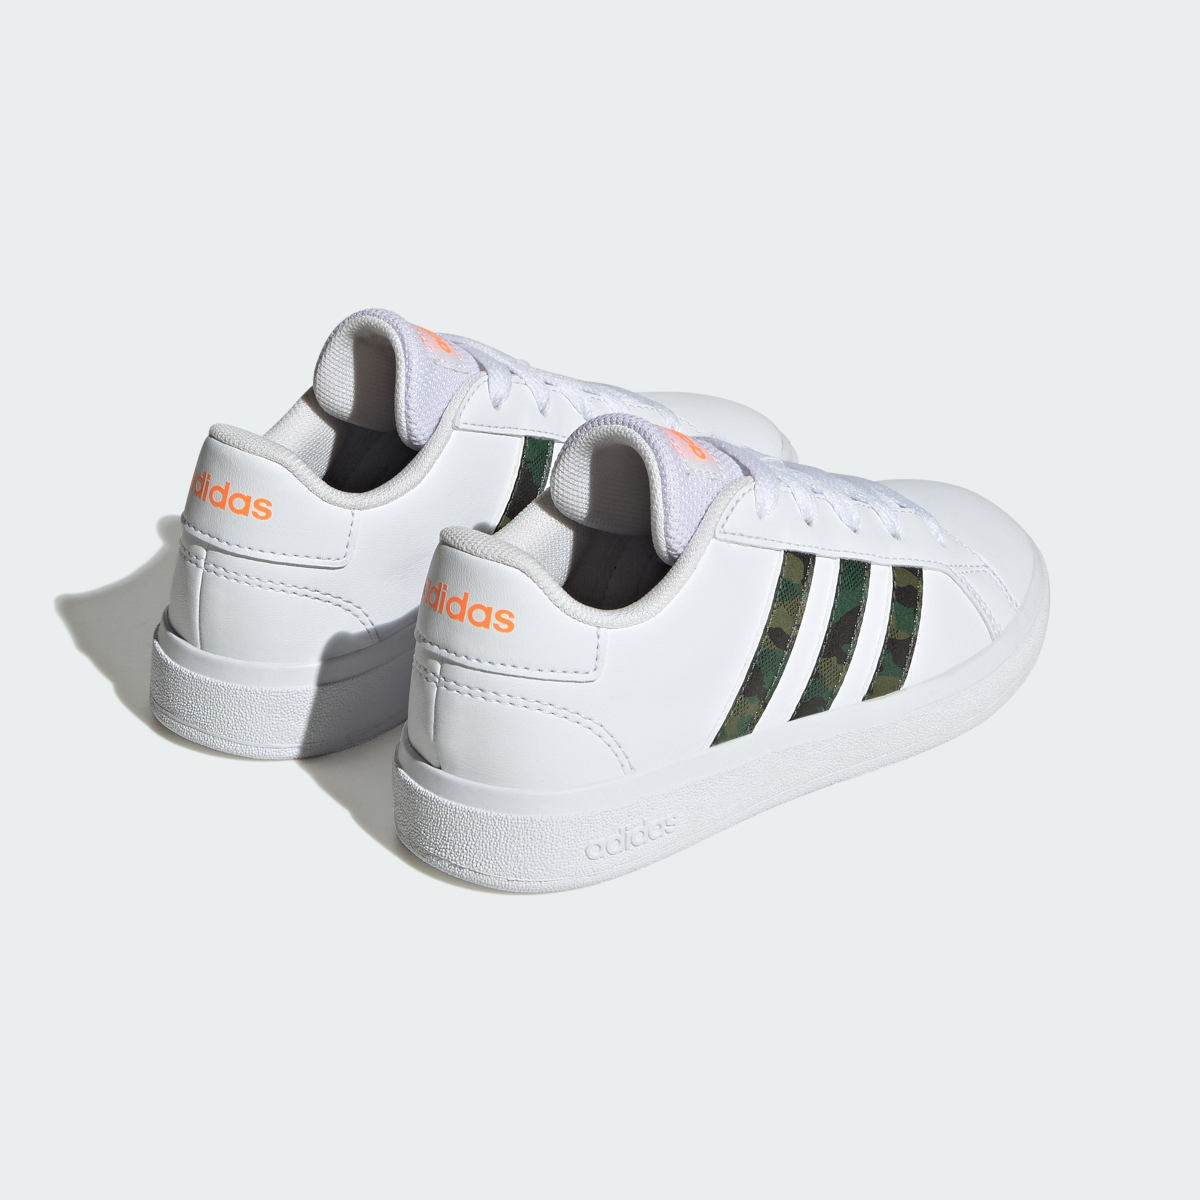 Adidas Grand Court Lifestyle Lace Tennis Schuh. 6